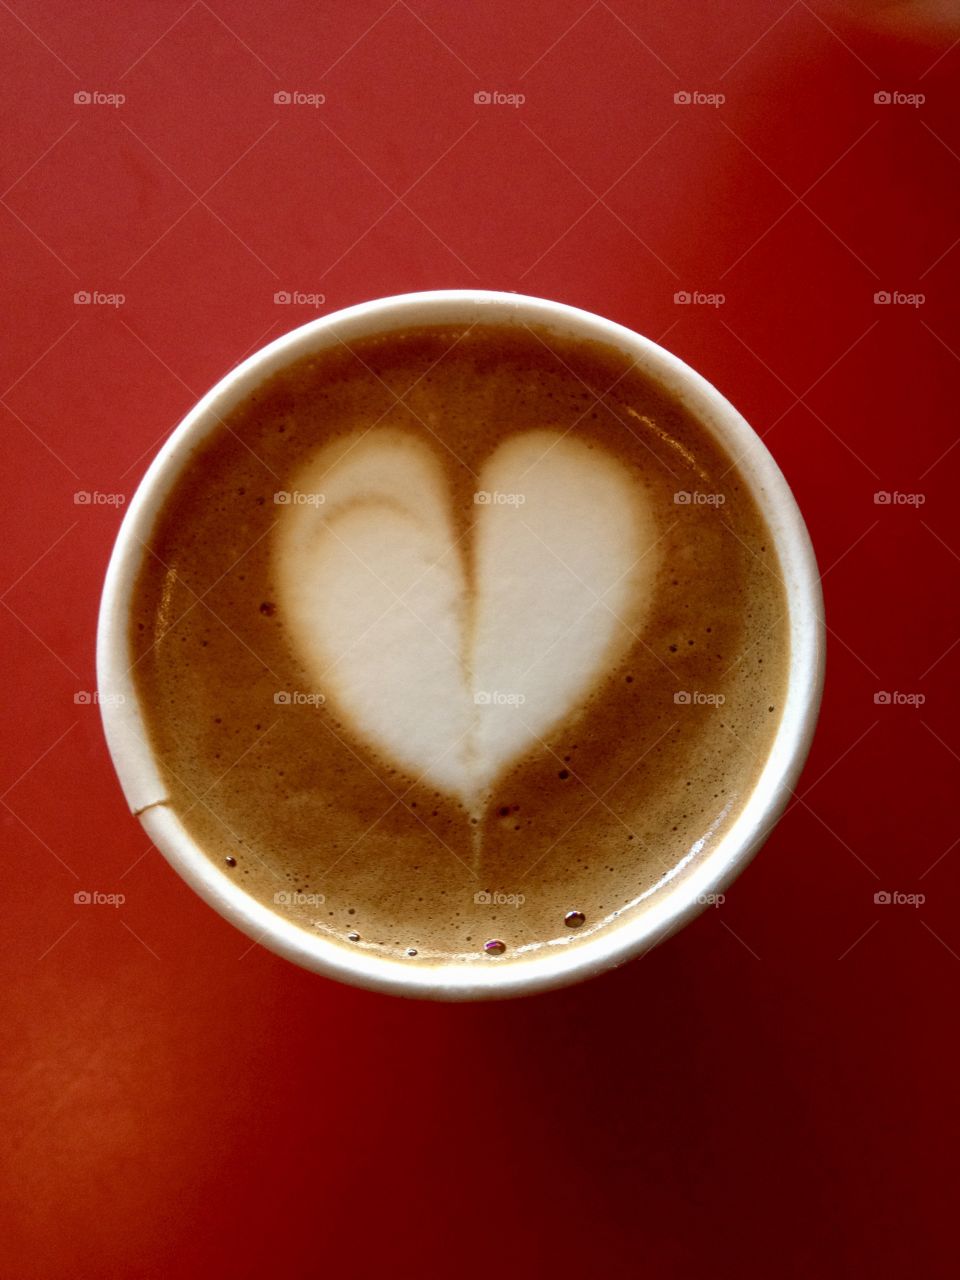 Love is a cup of coffee shared with friends